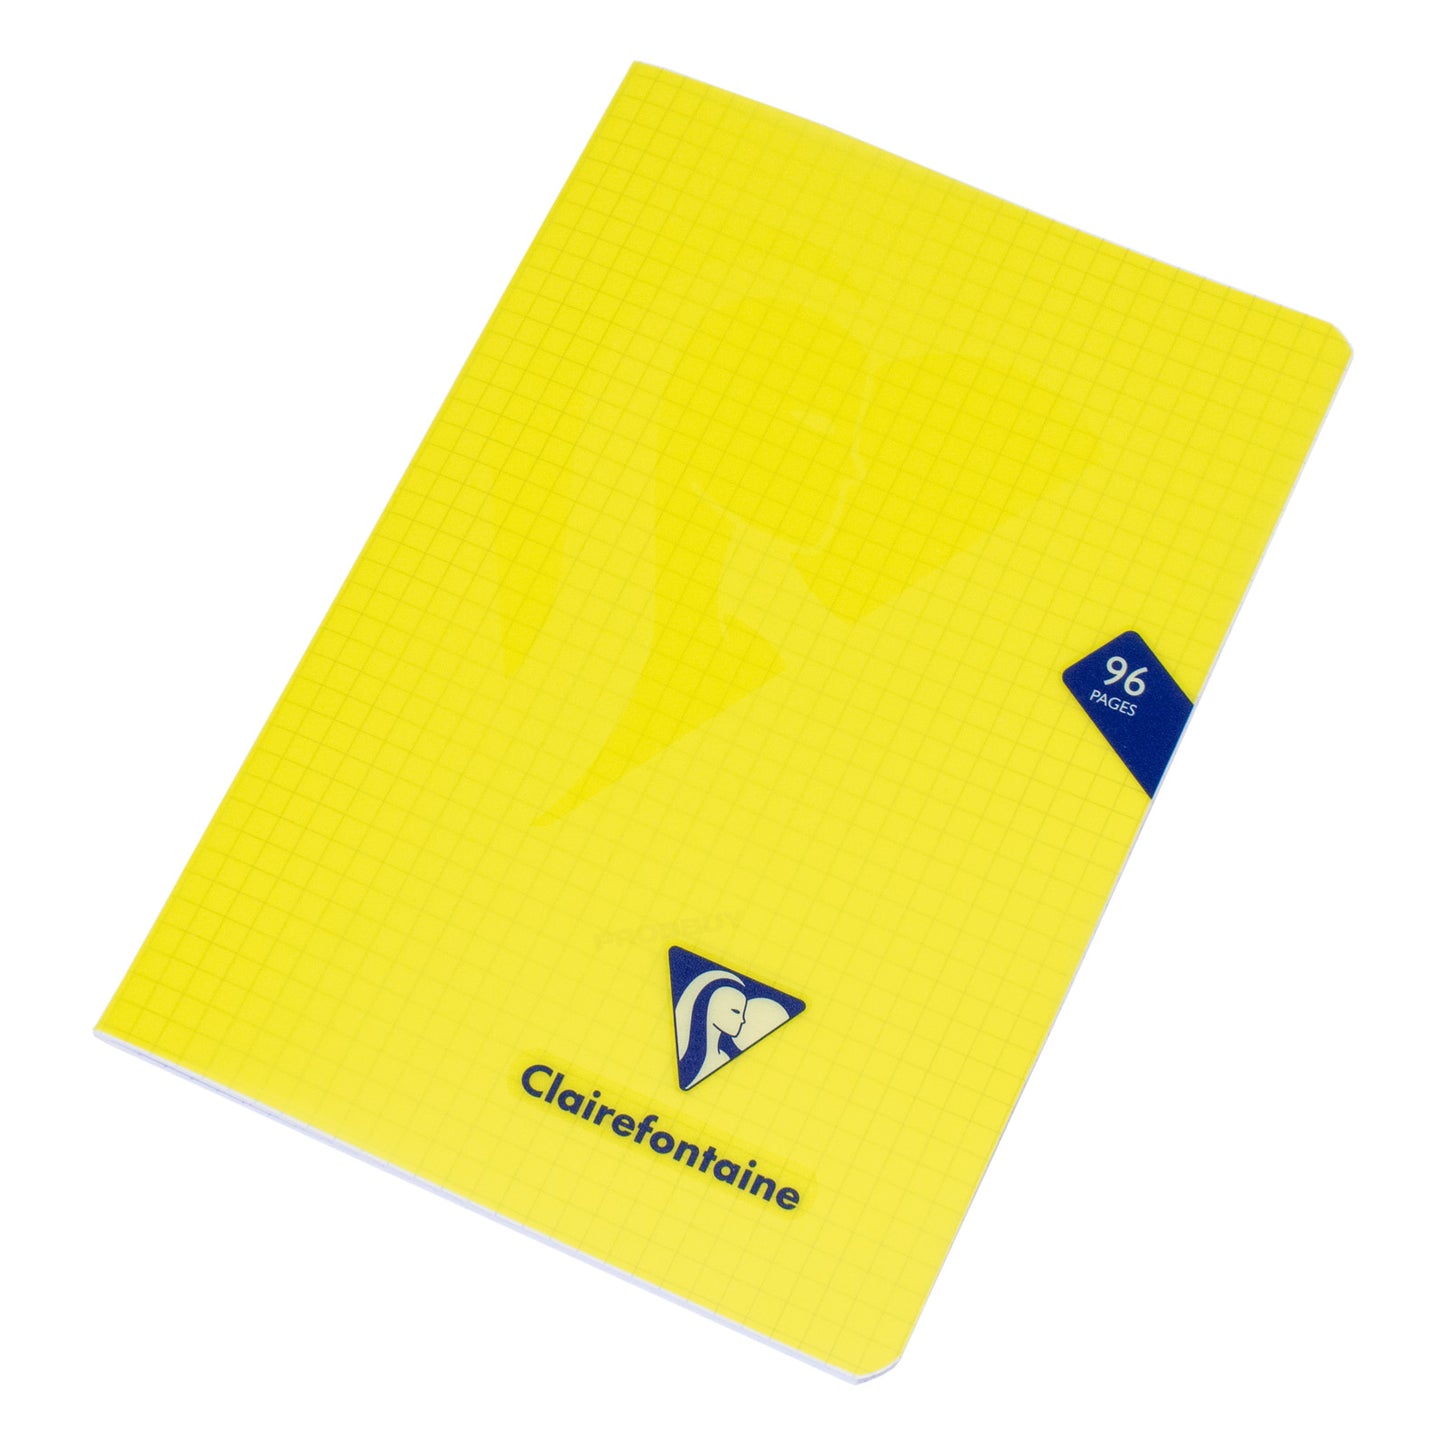 Neon A5 Maths Notebook with 5x5mm Square Grid & Choice of Colour